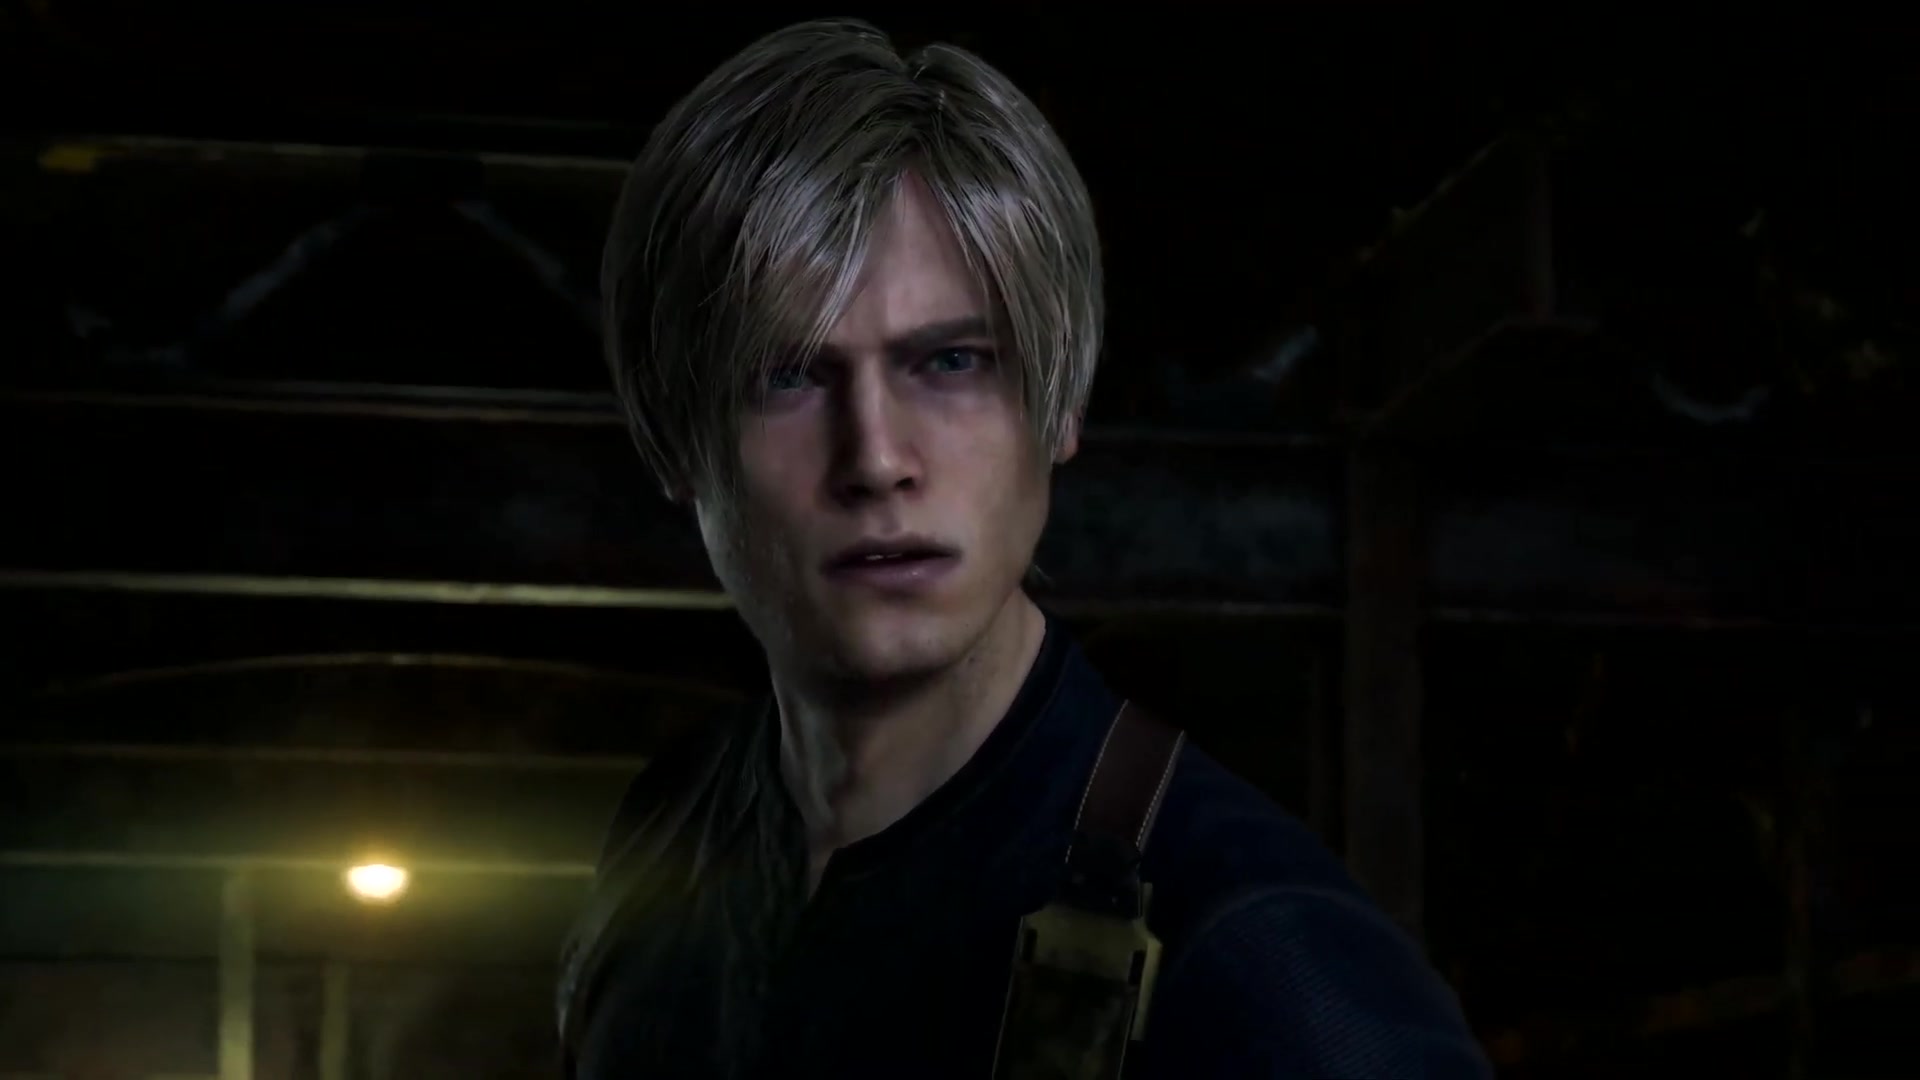 What do you think about resident evil 4 remake Krauser? : r/gaymers